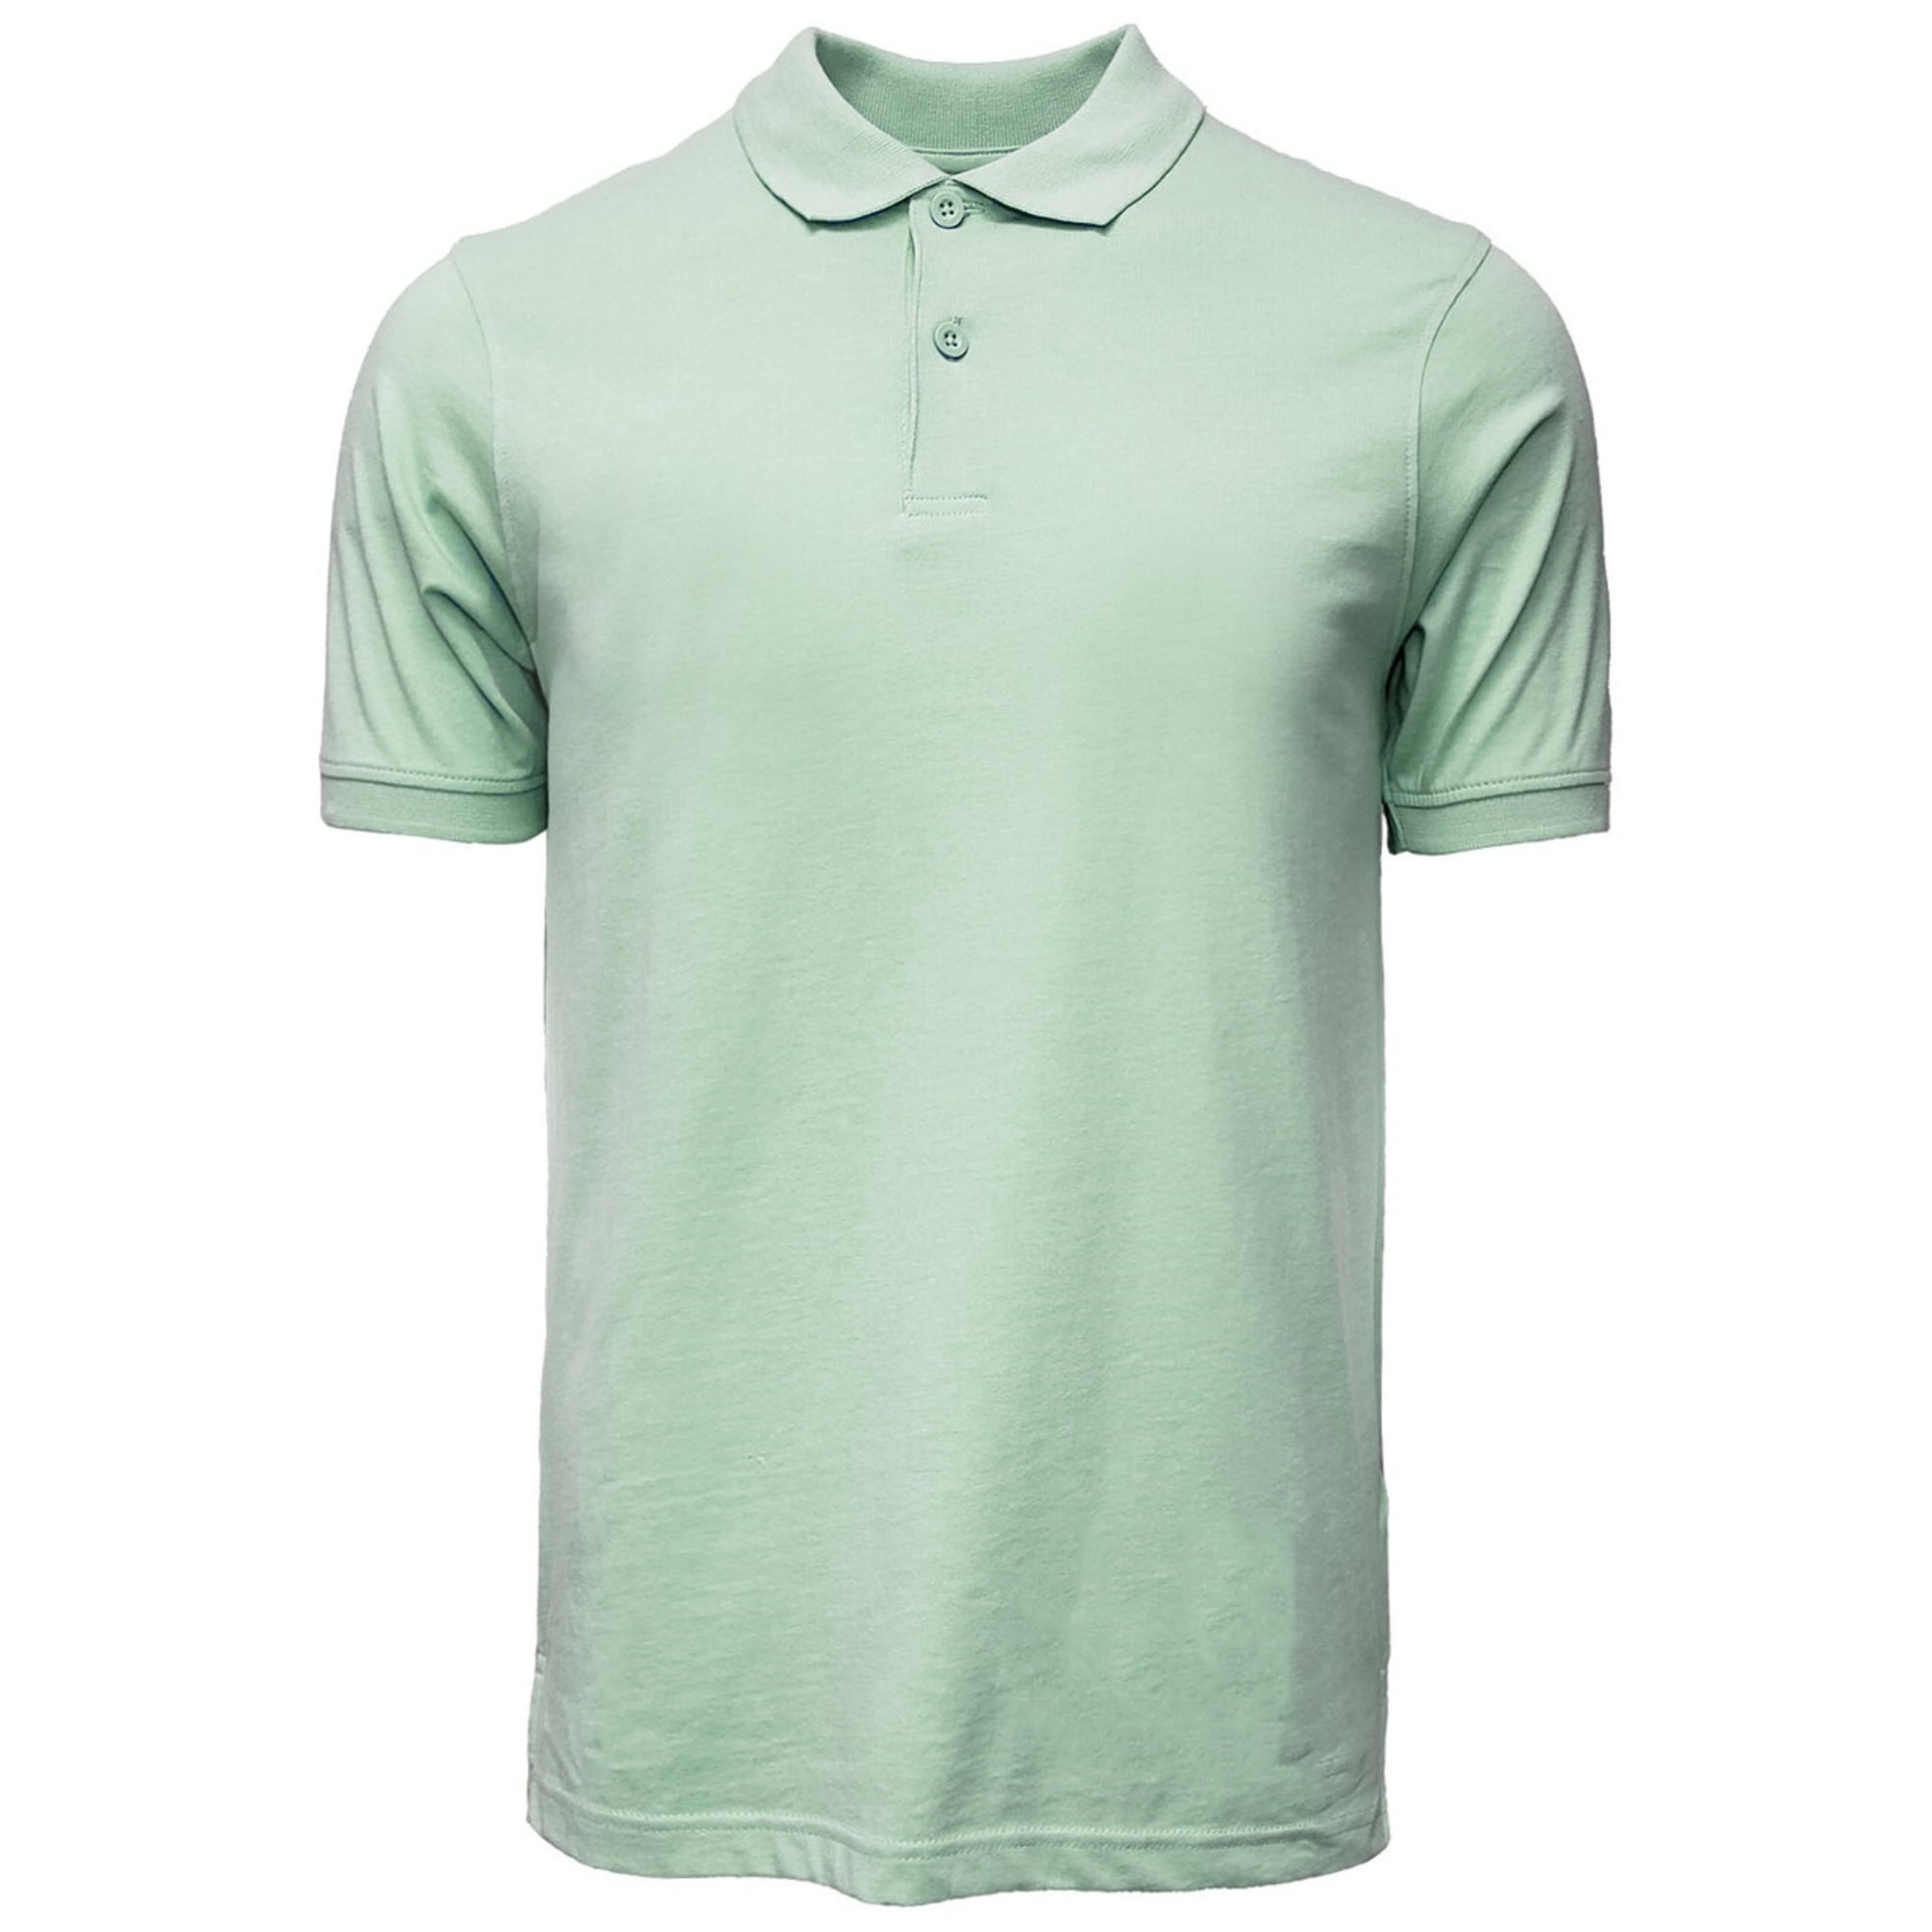 Marquis Mint Green Slim Fit Jersey Polo Shirt - Ultra Soft Fabric ...